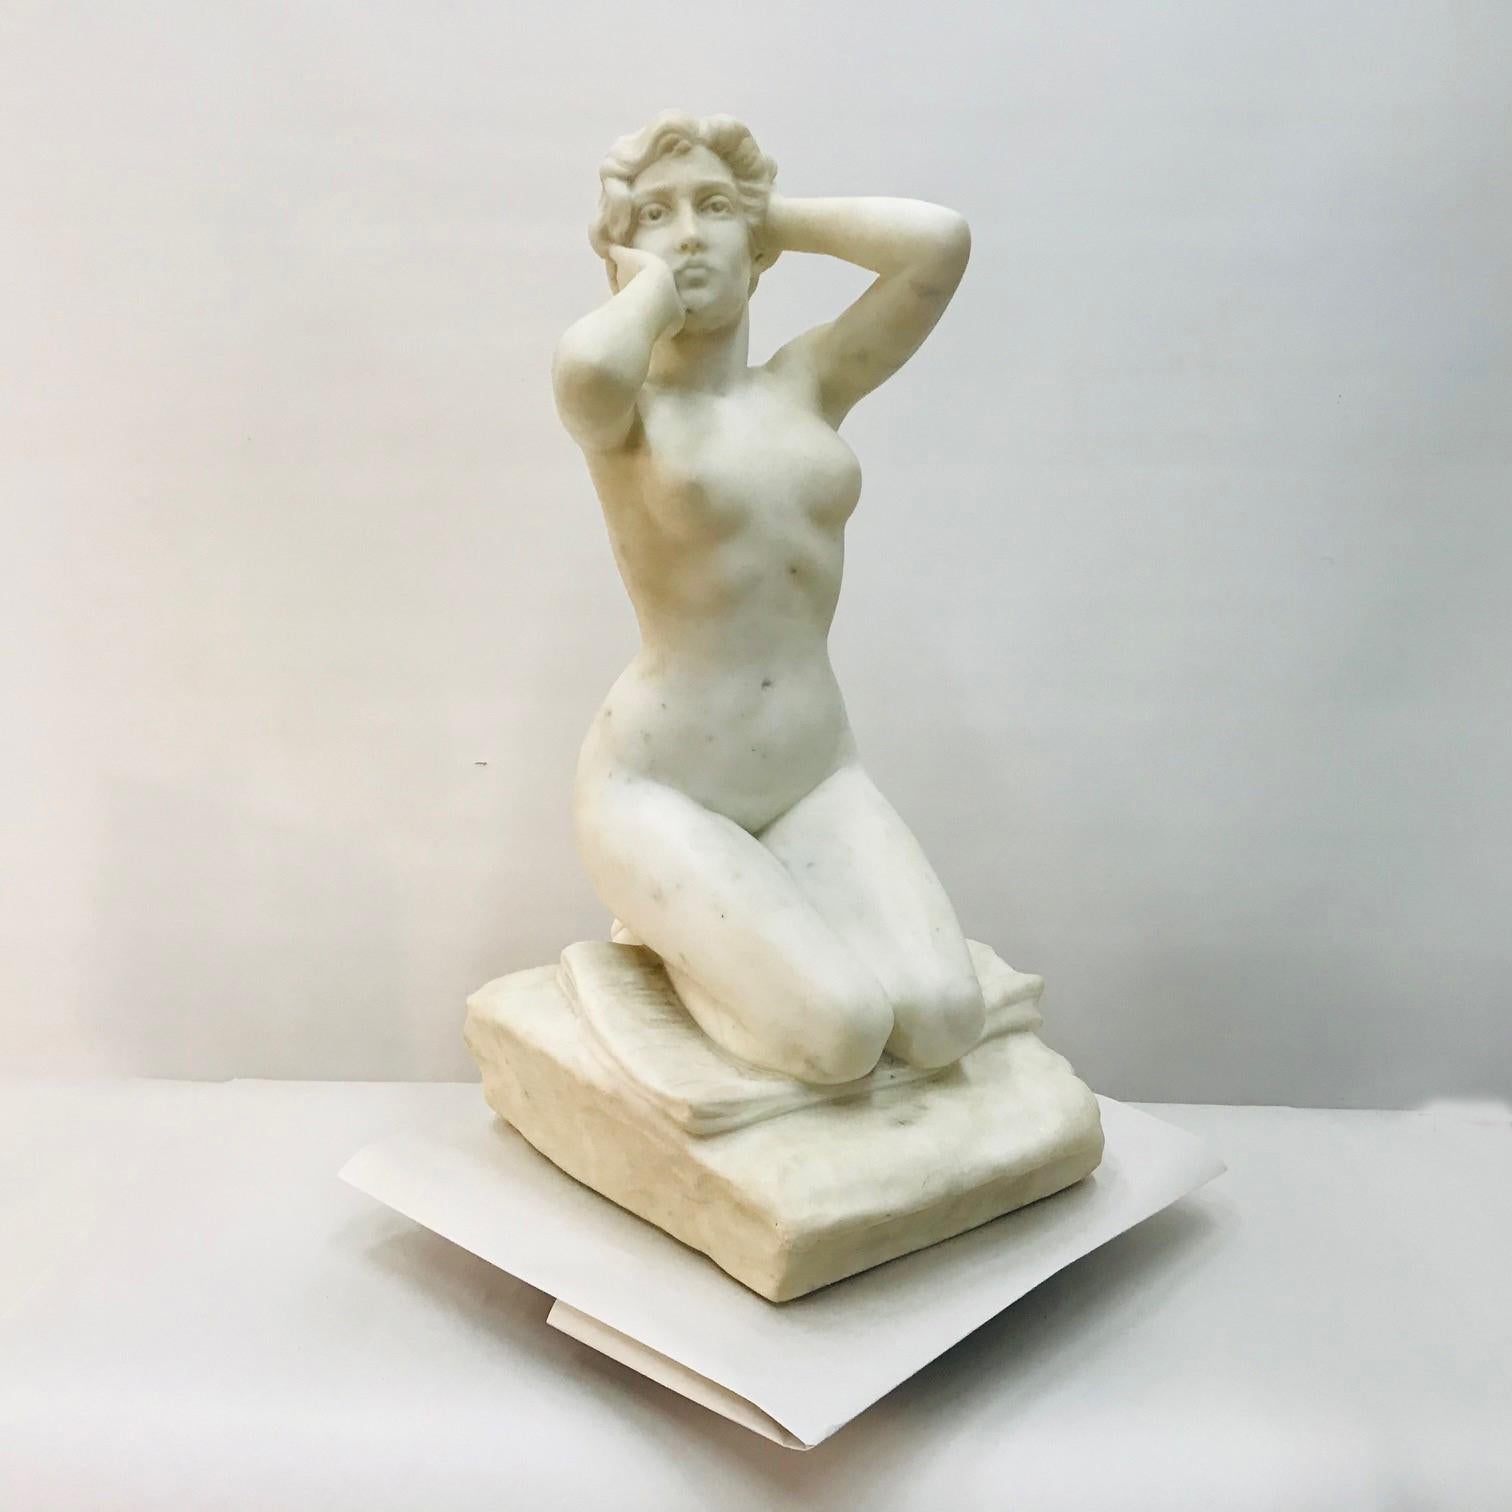  Constantino Barbella (1852-1925)
 La Bagneuse, White Carrera marble.
 depicting a nude woman kneeling on a cushion and languidly arranging her hair; 
signed C. Barbella
In its day this would have been seen as a rather daring depiction of the female